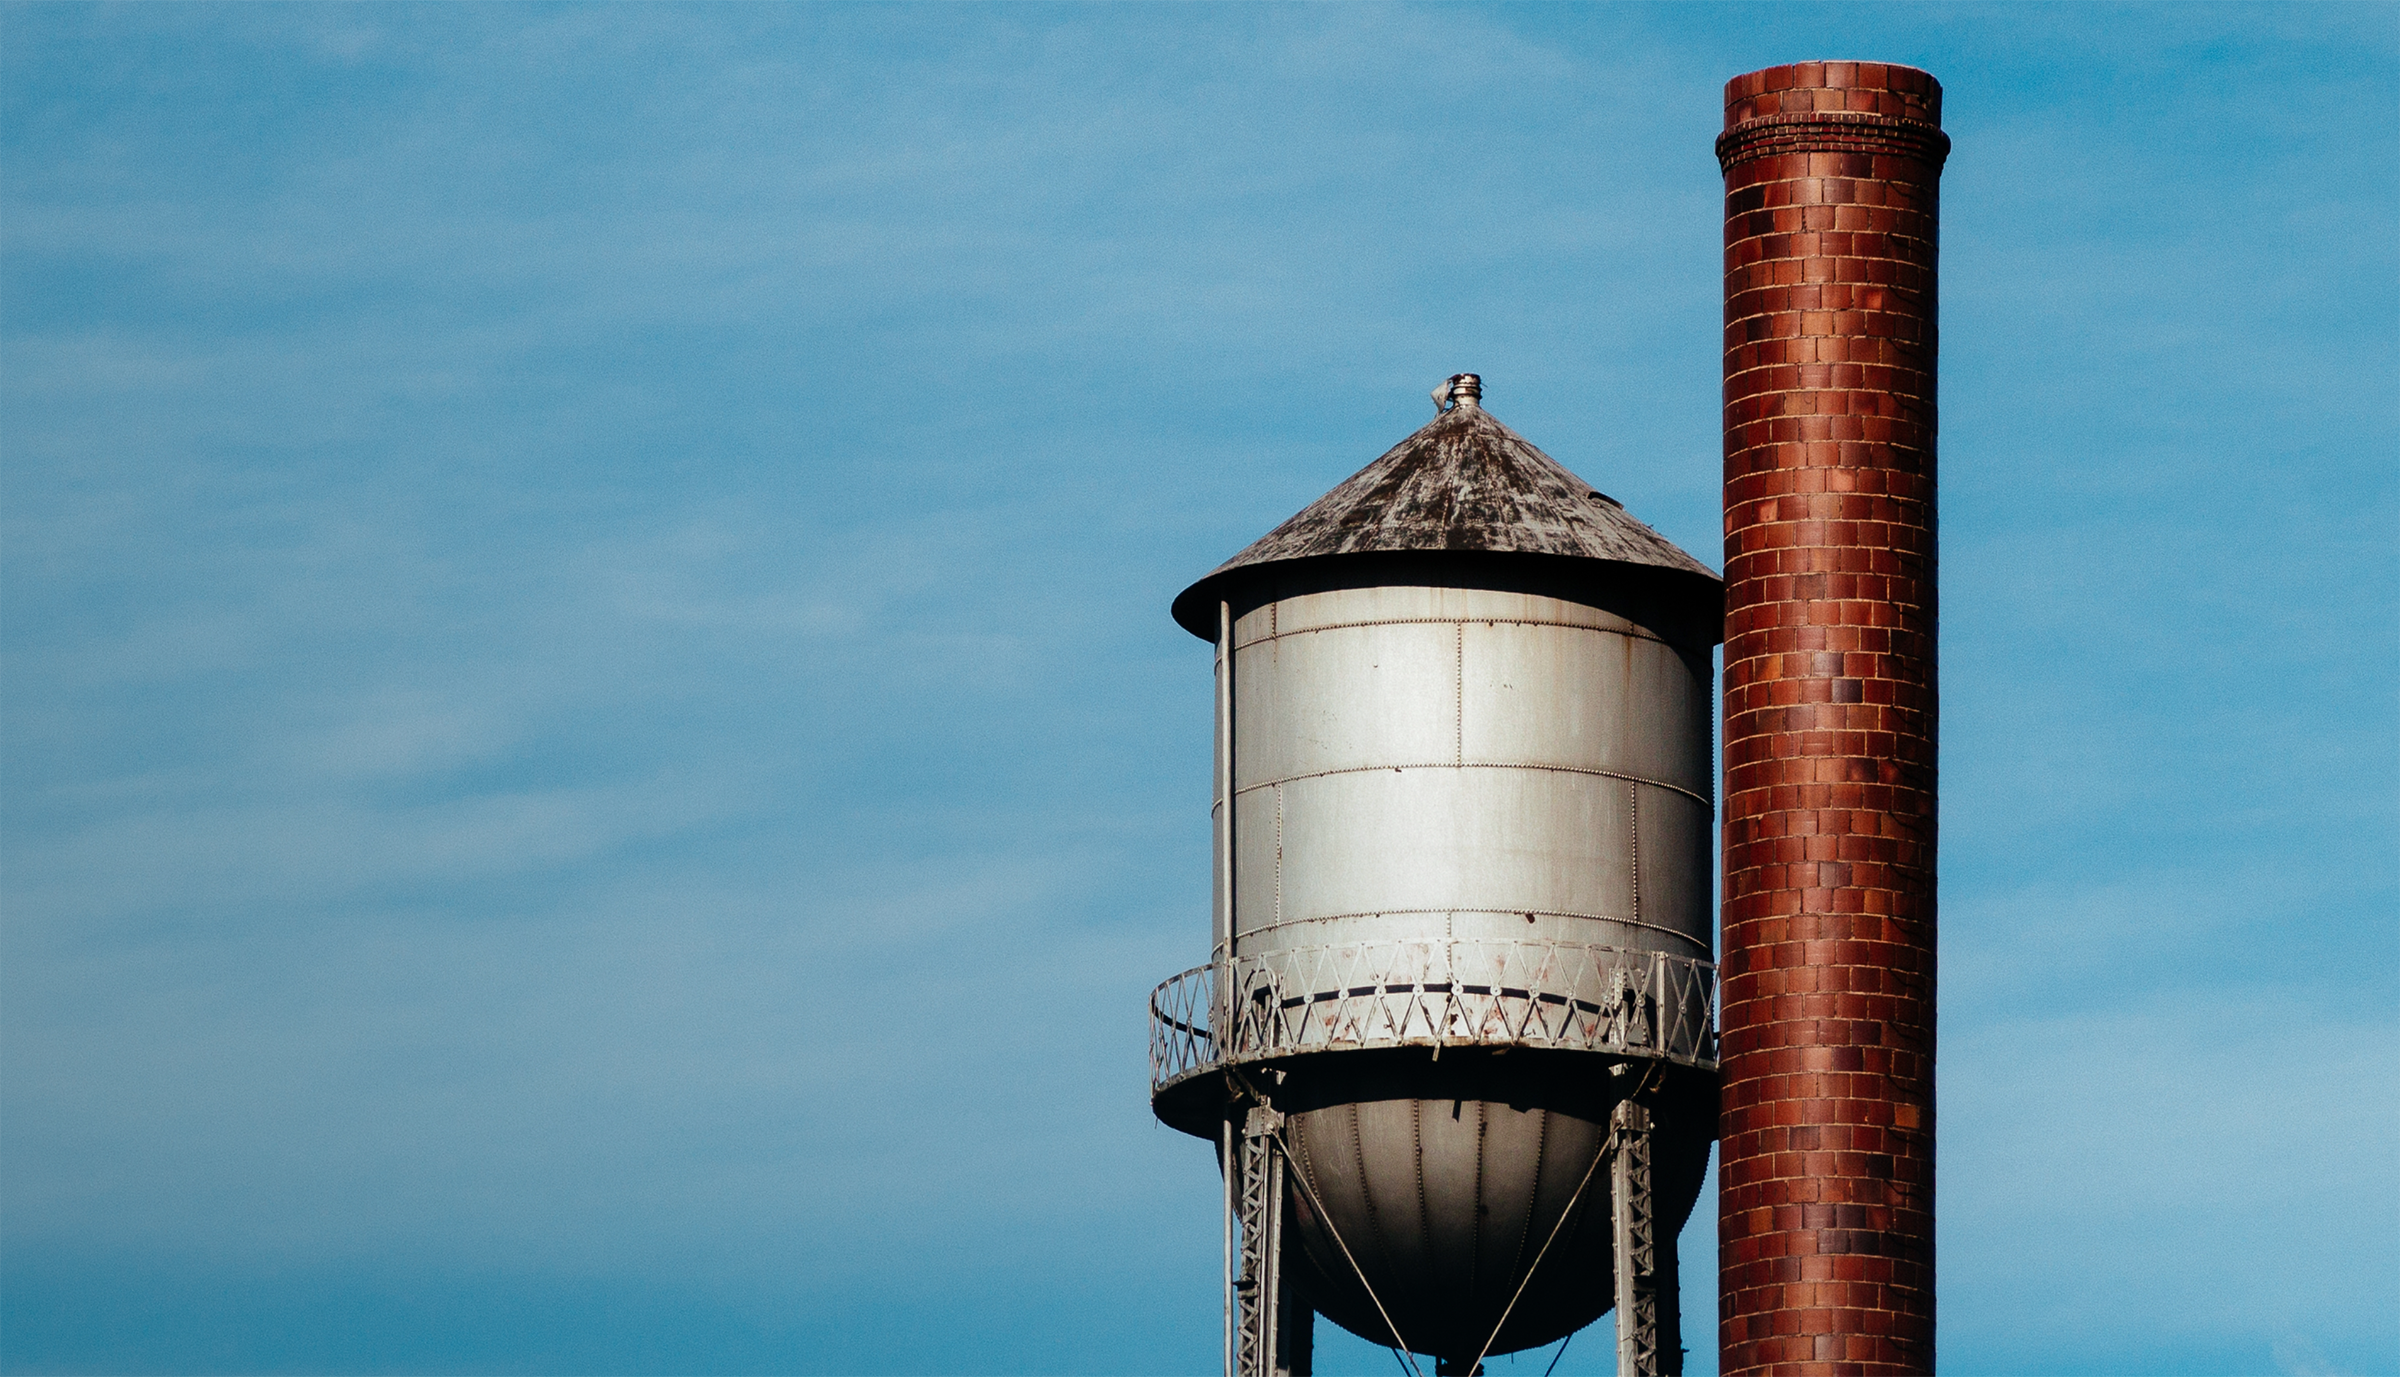 A water tower and a smokestack